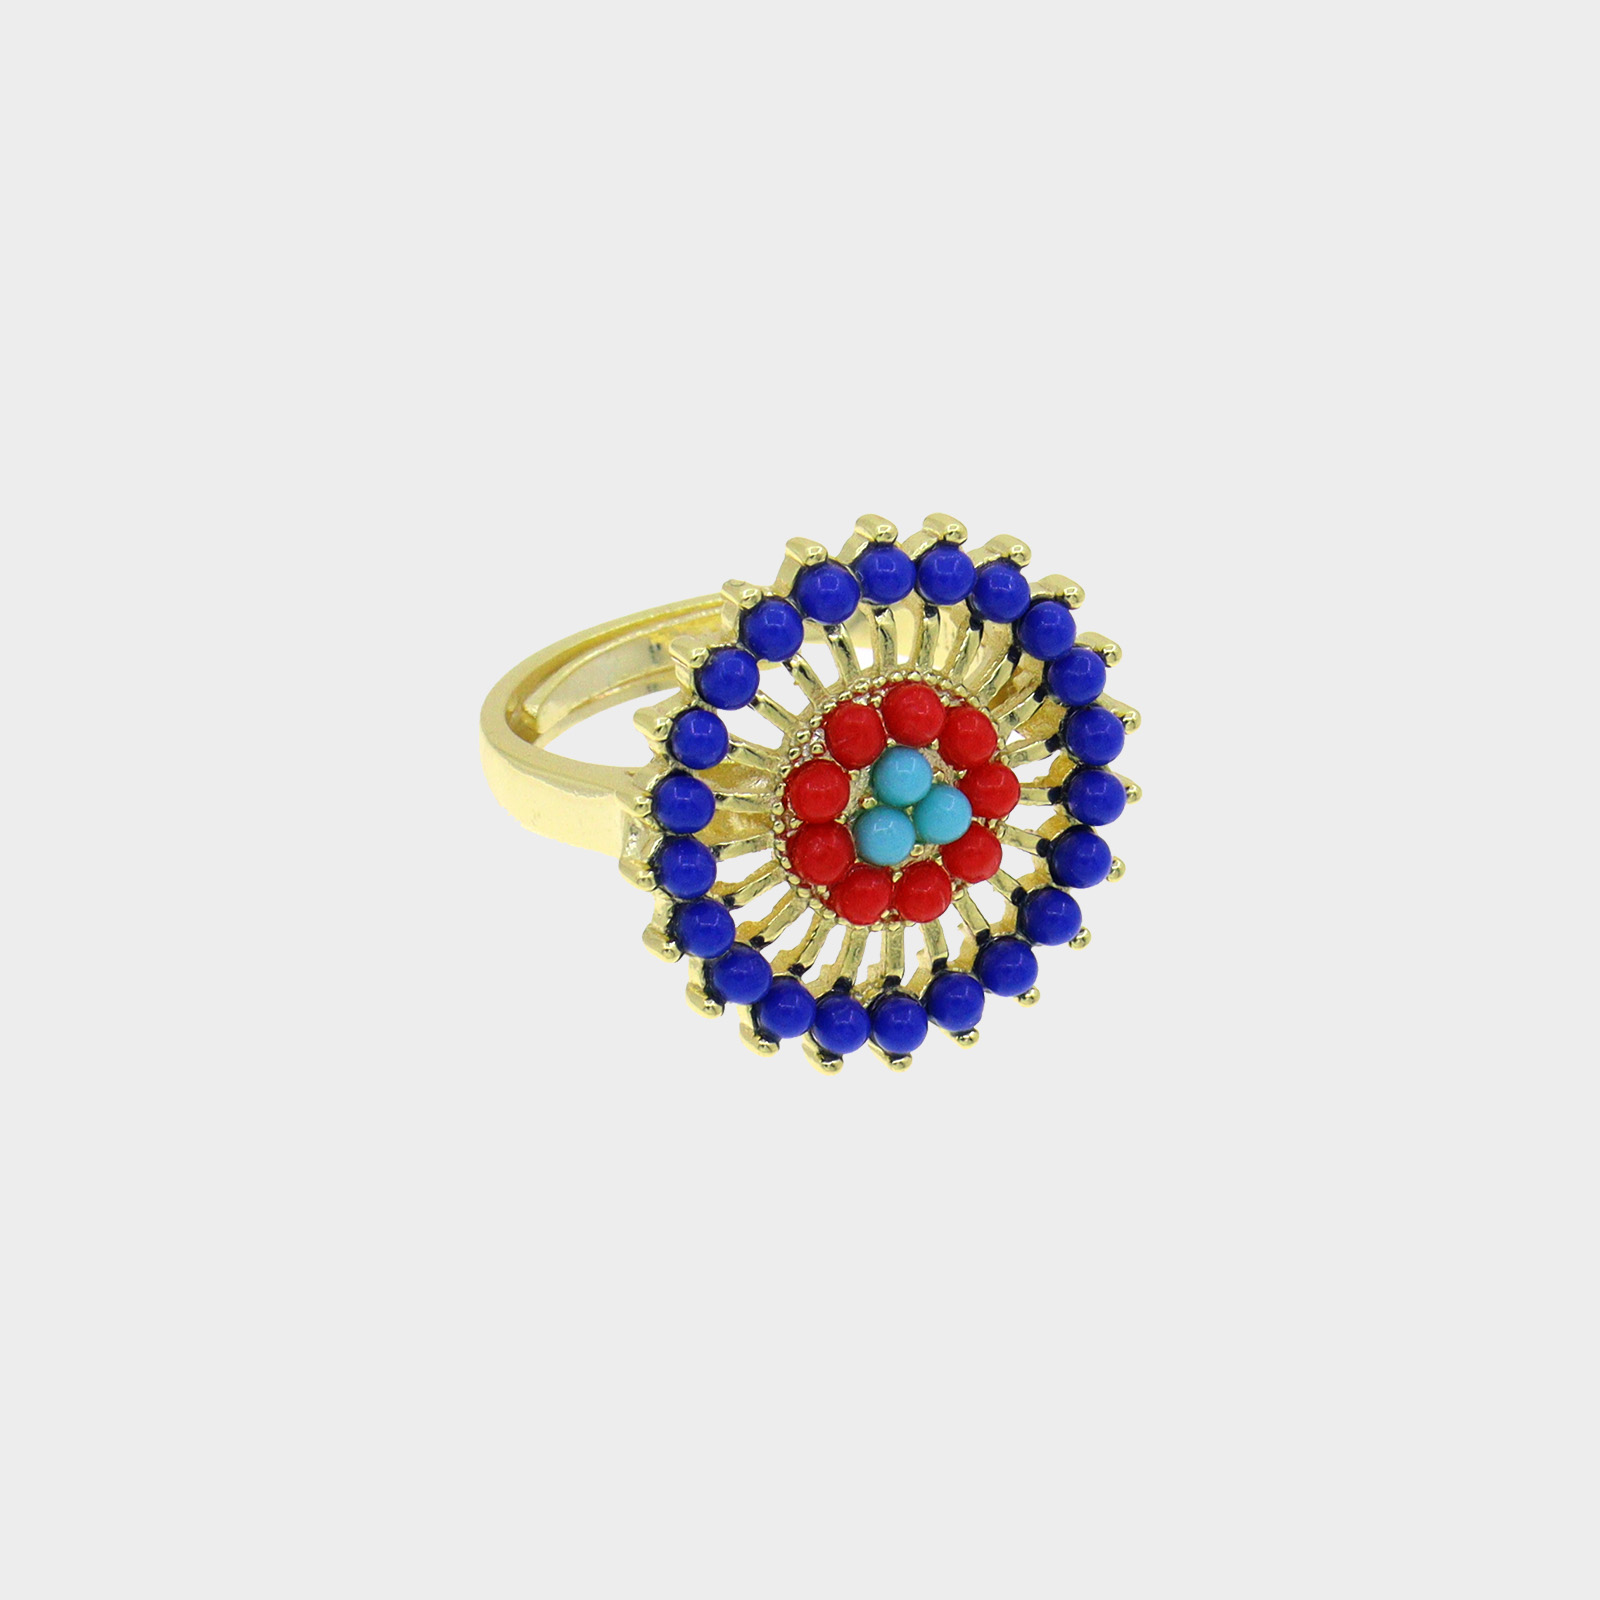 The Ring Amazon Flower Blue